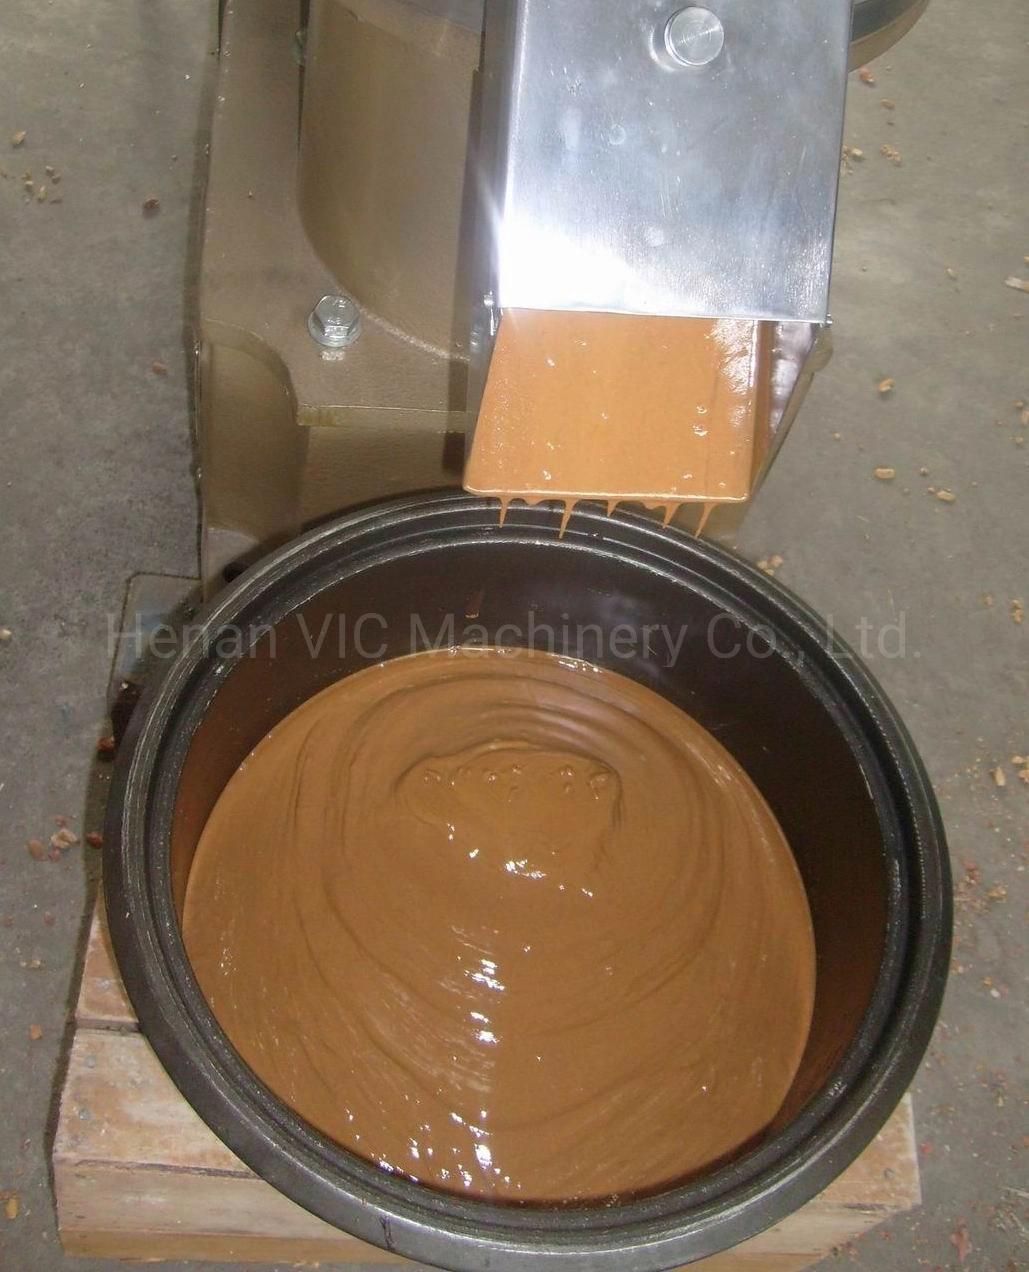 Peanut Butter Mill, Stainless Steel Colloidal Mill with CE Approved